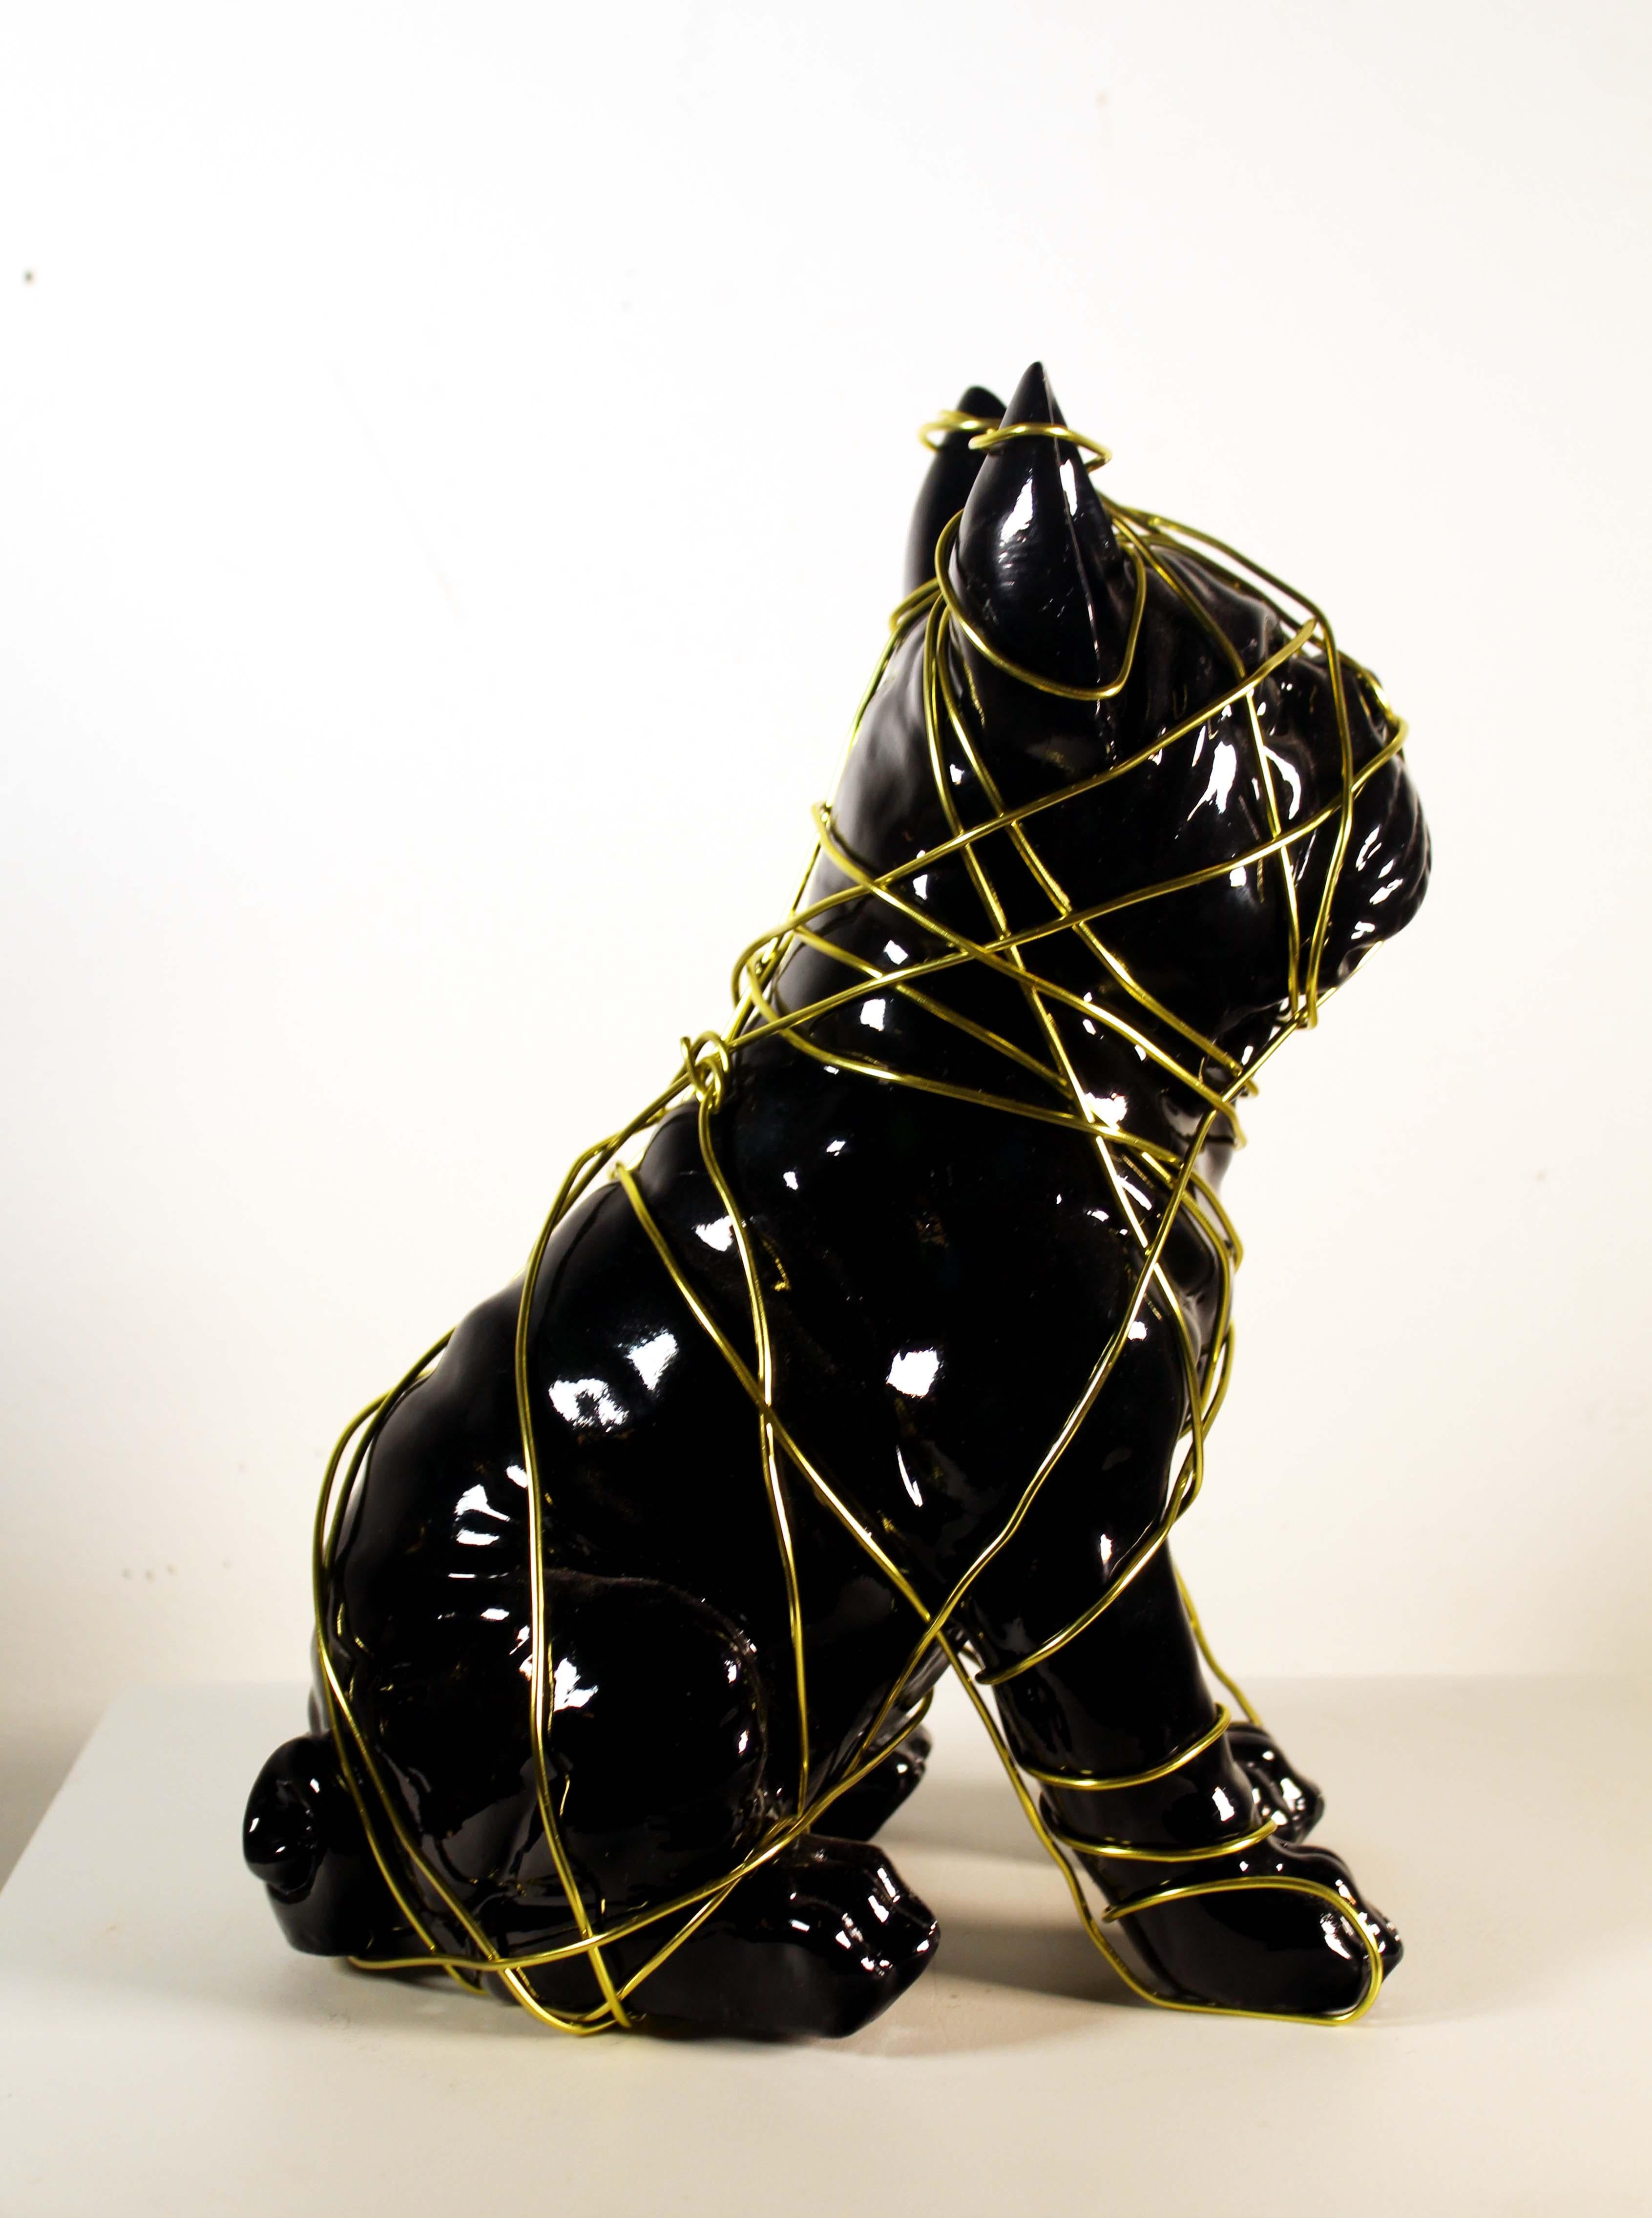 Modern Ceramic Sculpture Frenchie Neon with Wire Homage to Dan Flavin In Good Condition For Sale In Keego Harbor, MI